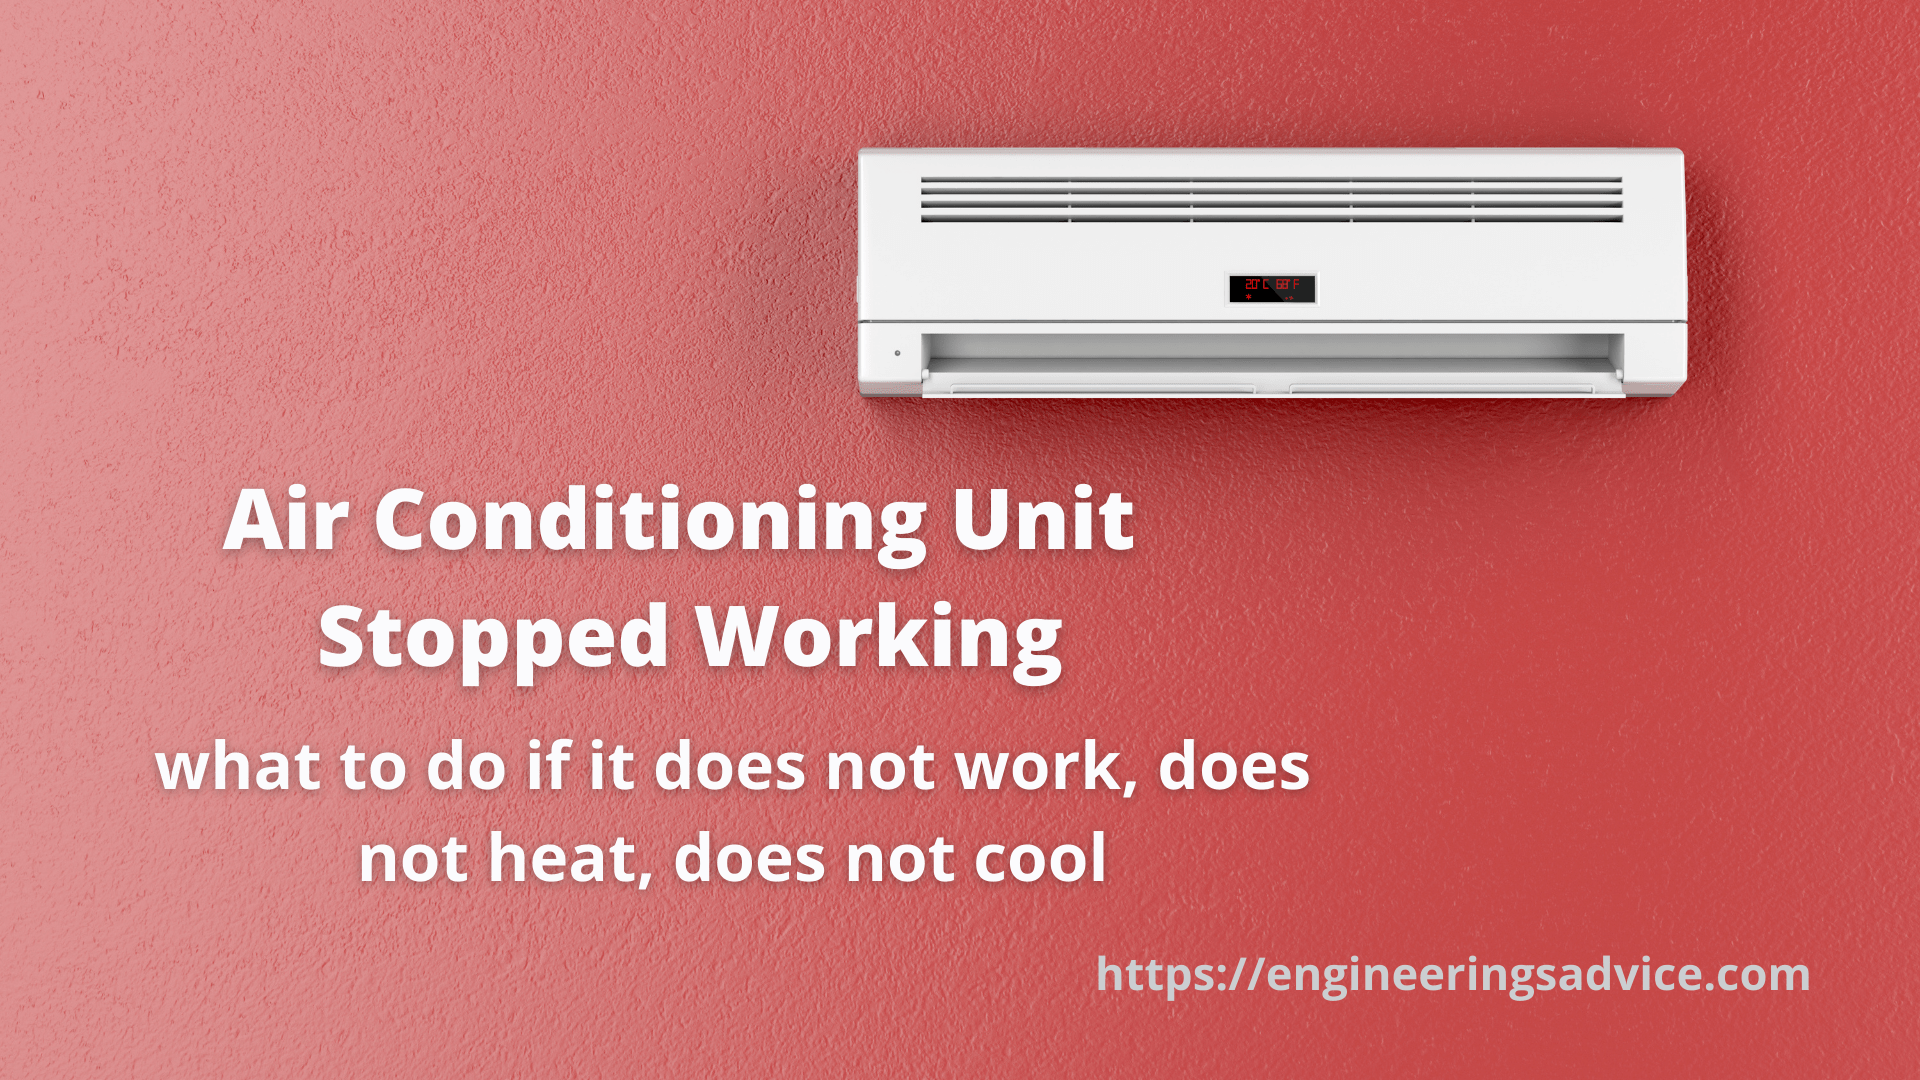 Air Conditioning Unit Stopped Working